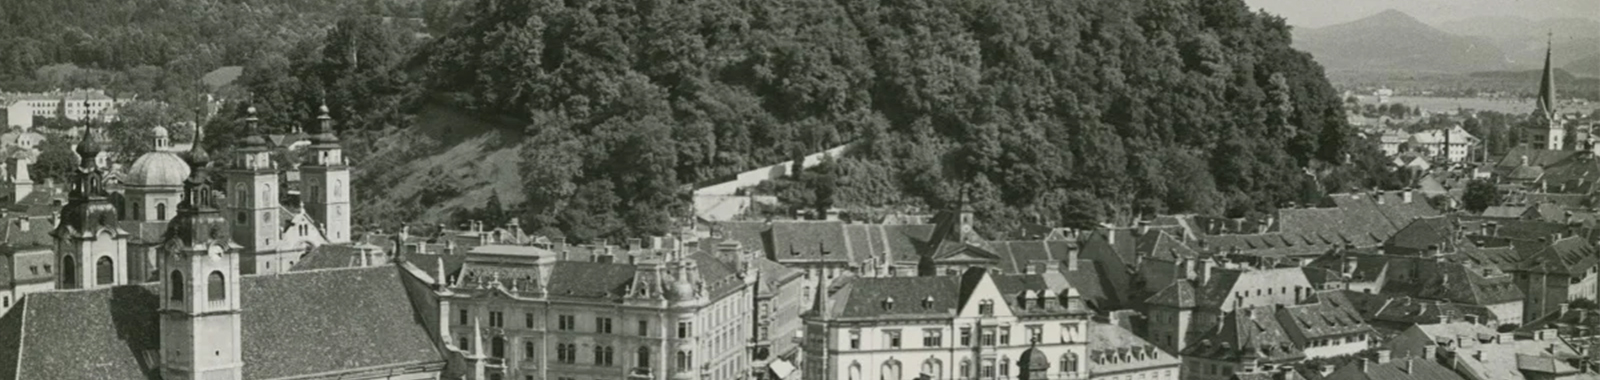 Black and white photograph of a historic European town in the former Yugoslavia